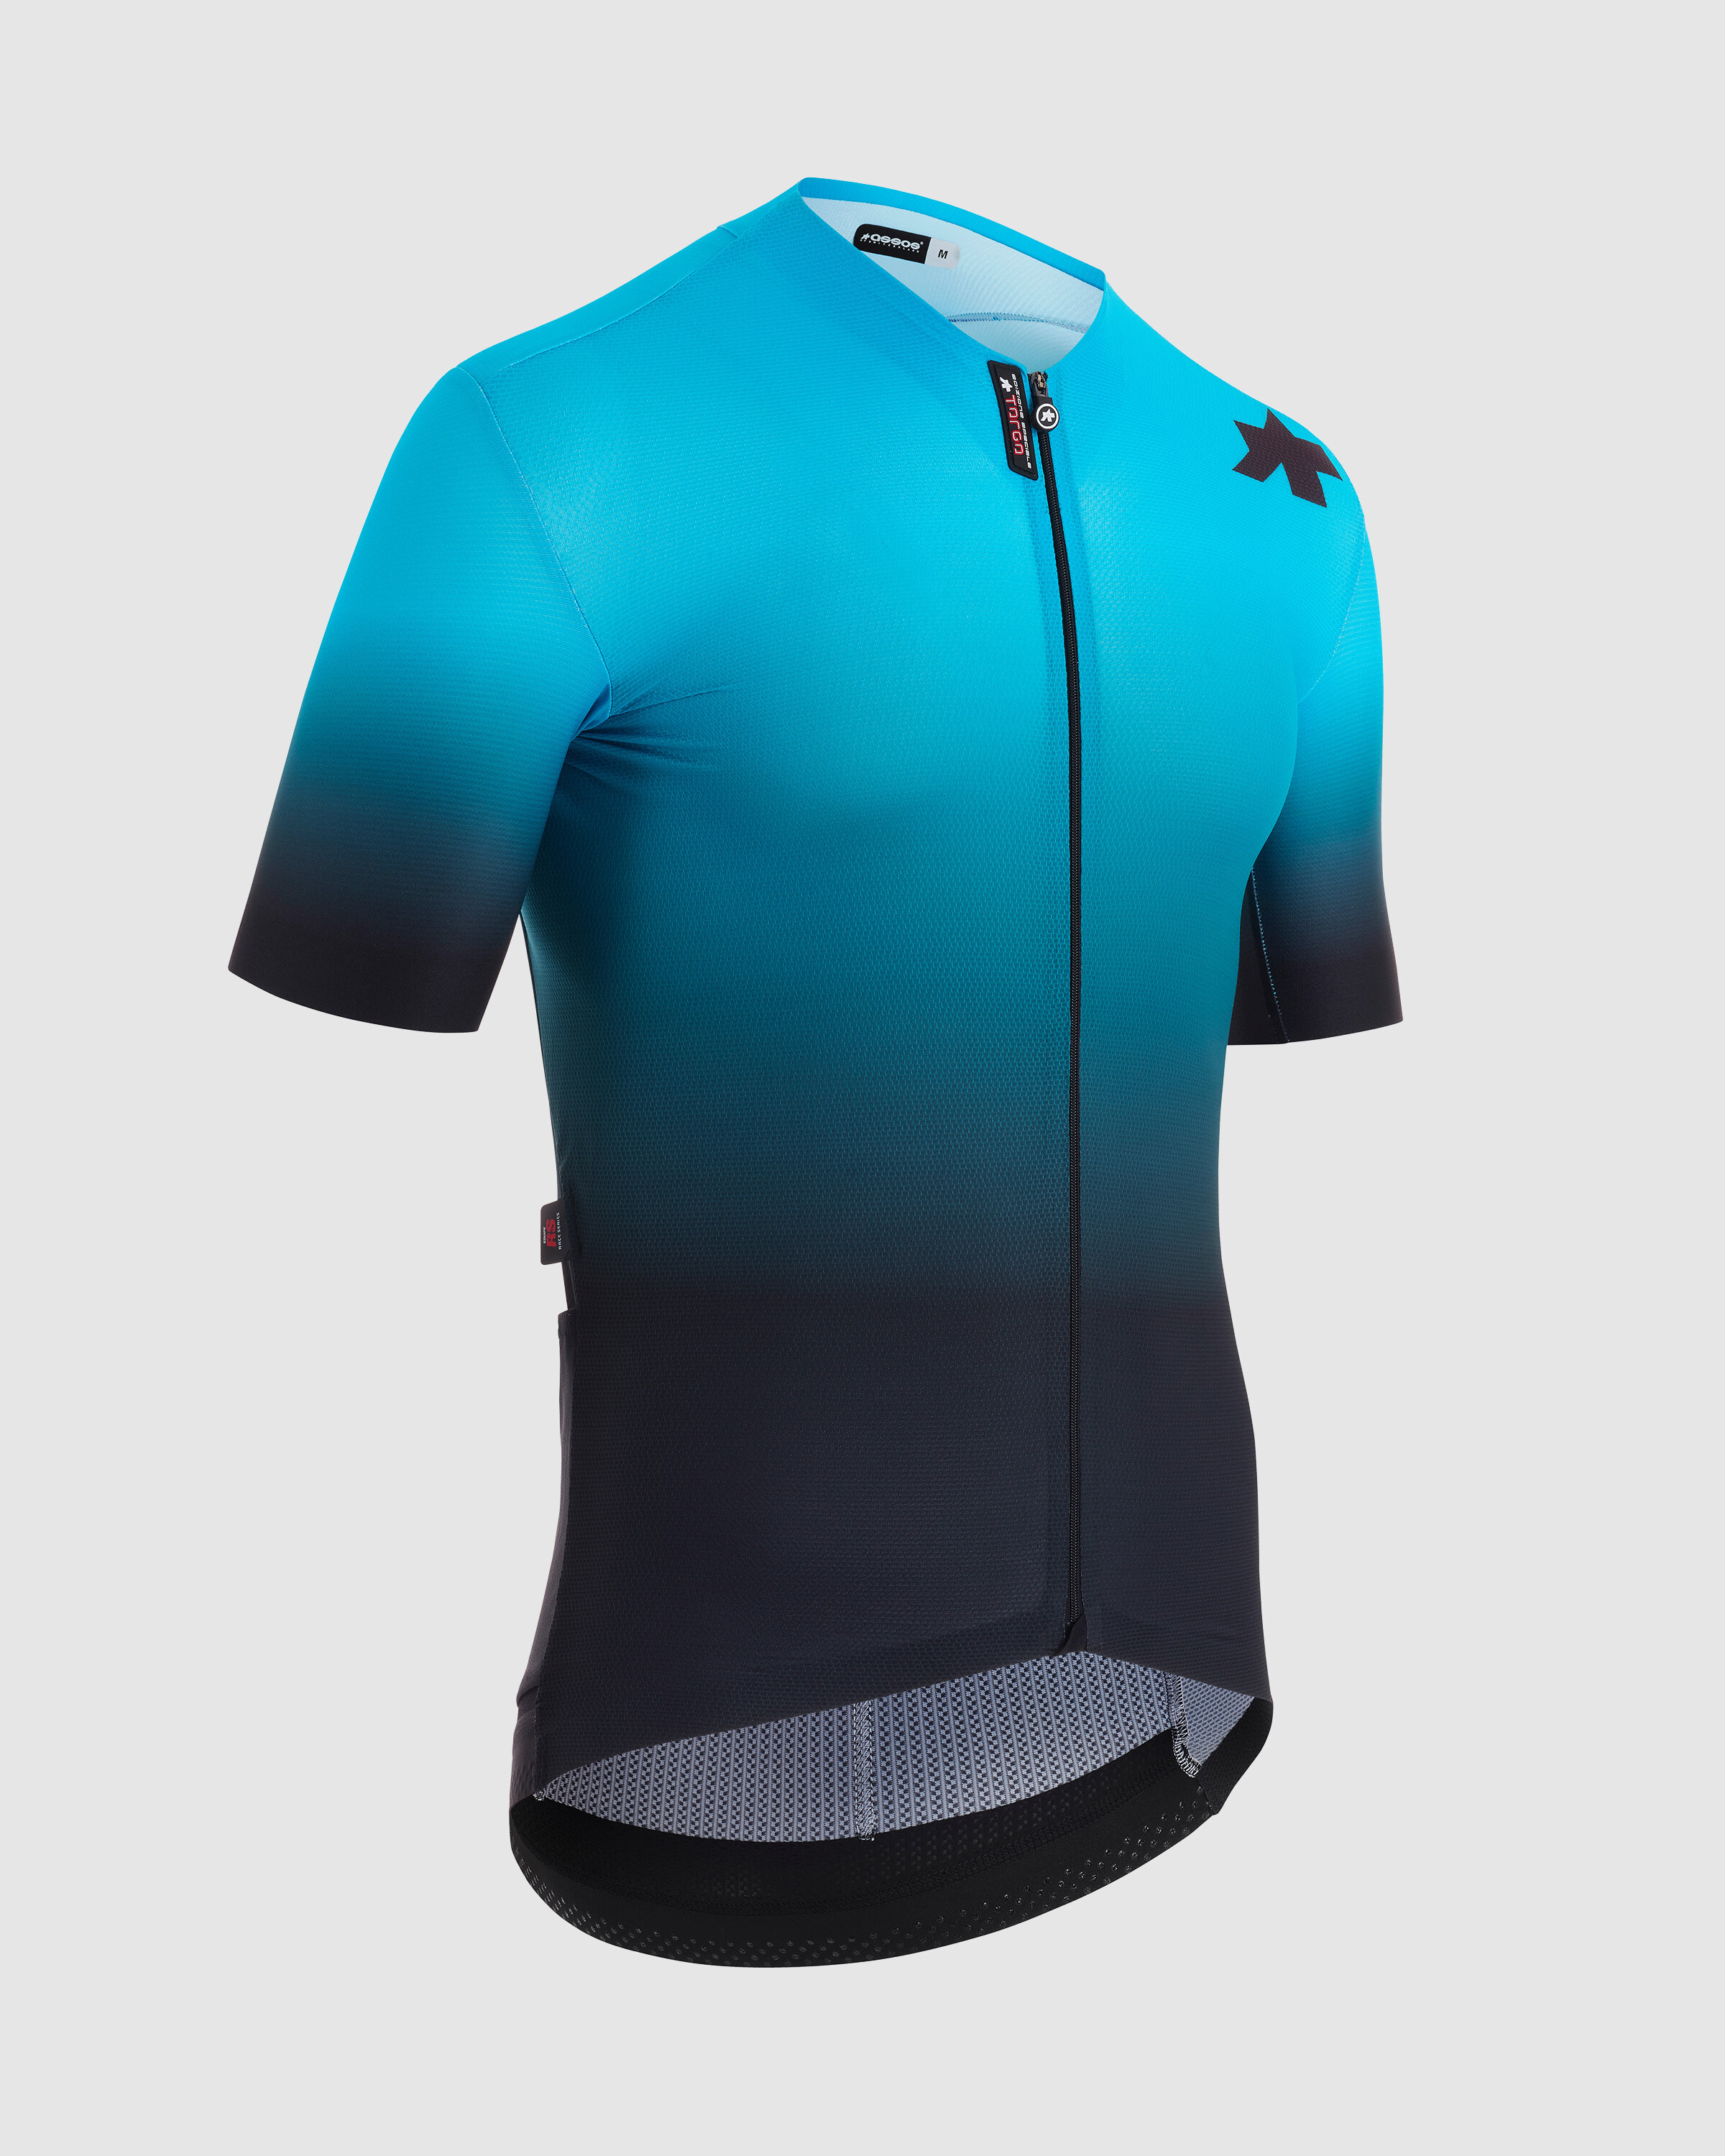 EQUIPE RS Jersey S9 TARGA - ASSOS Of Switzerland - Official Outlet